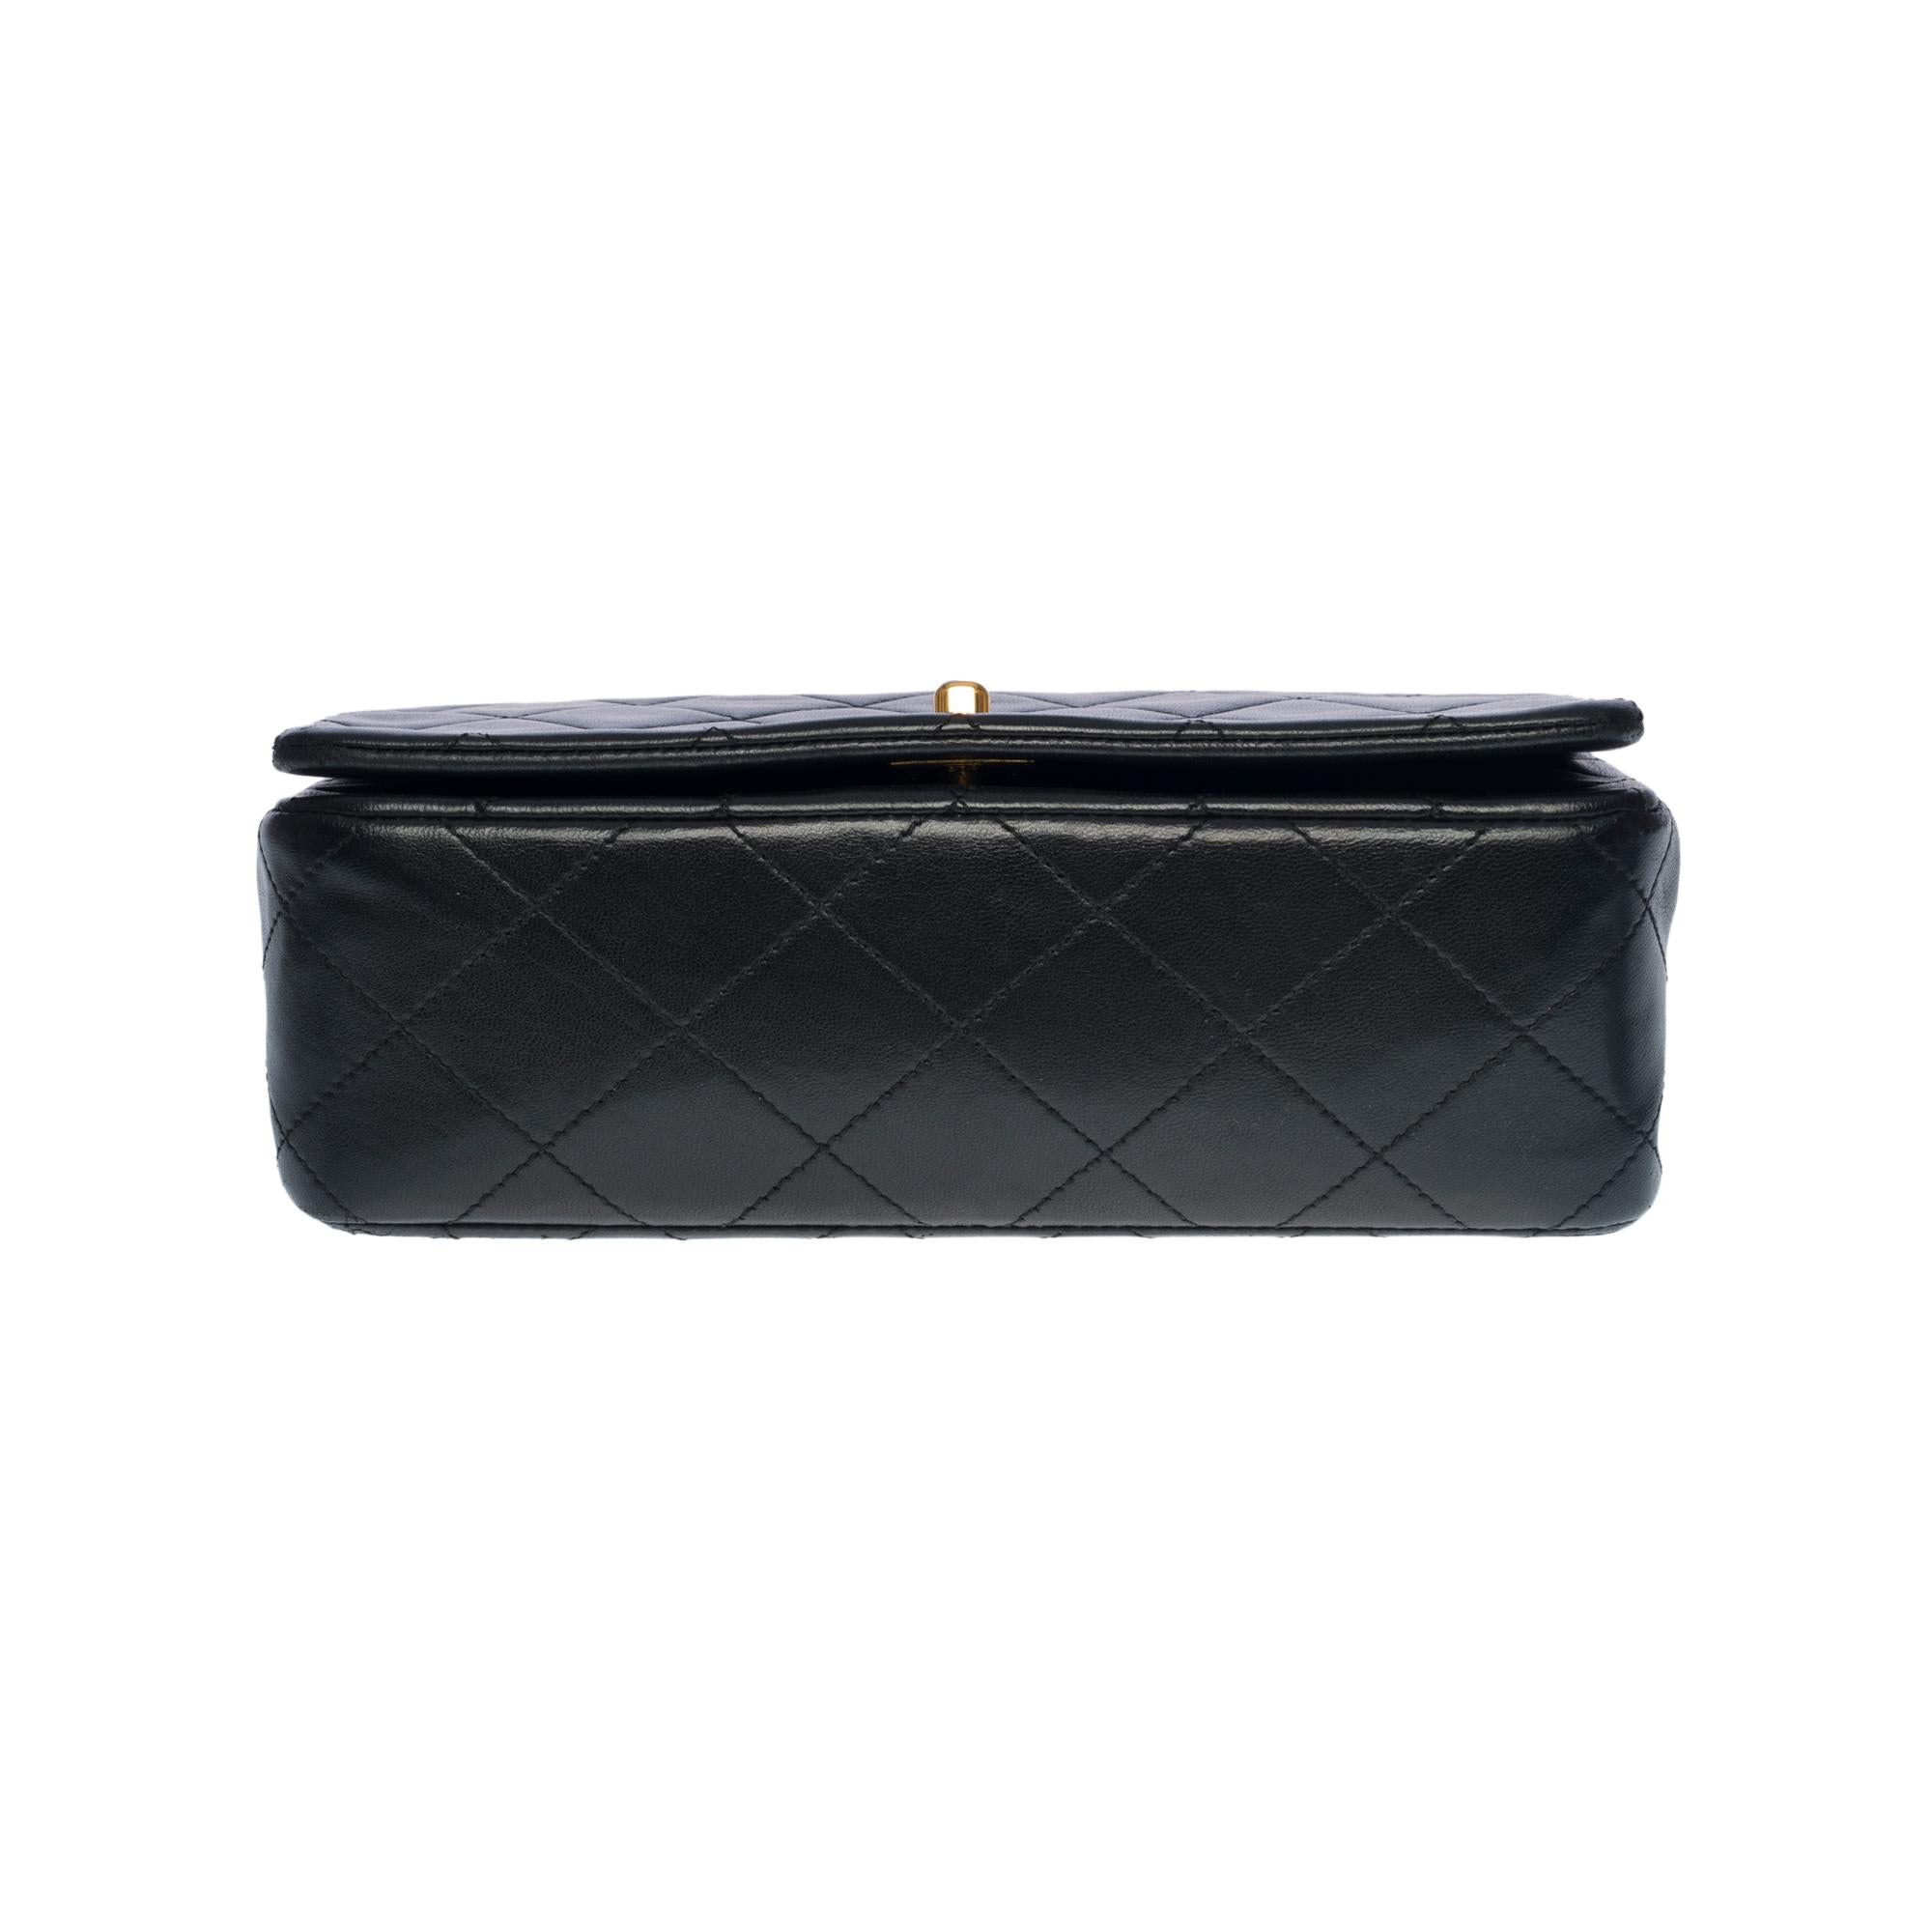 Chanel Classic Mini Full Flap shoulder bag in black quilted lambskin leather, GHW 5